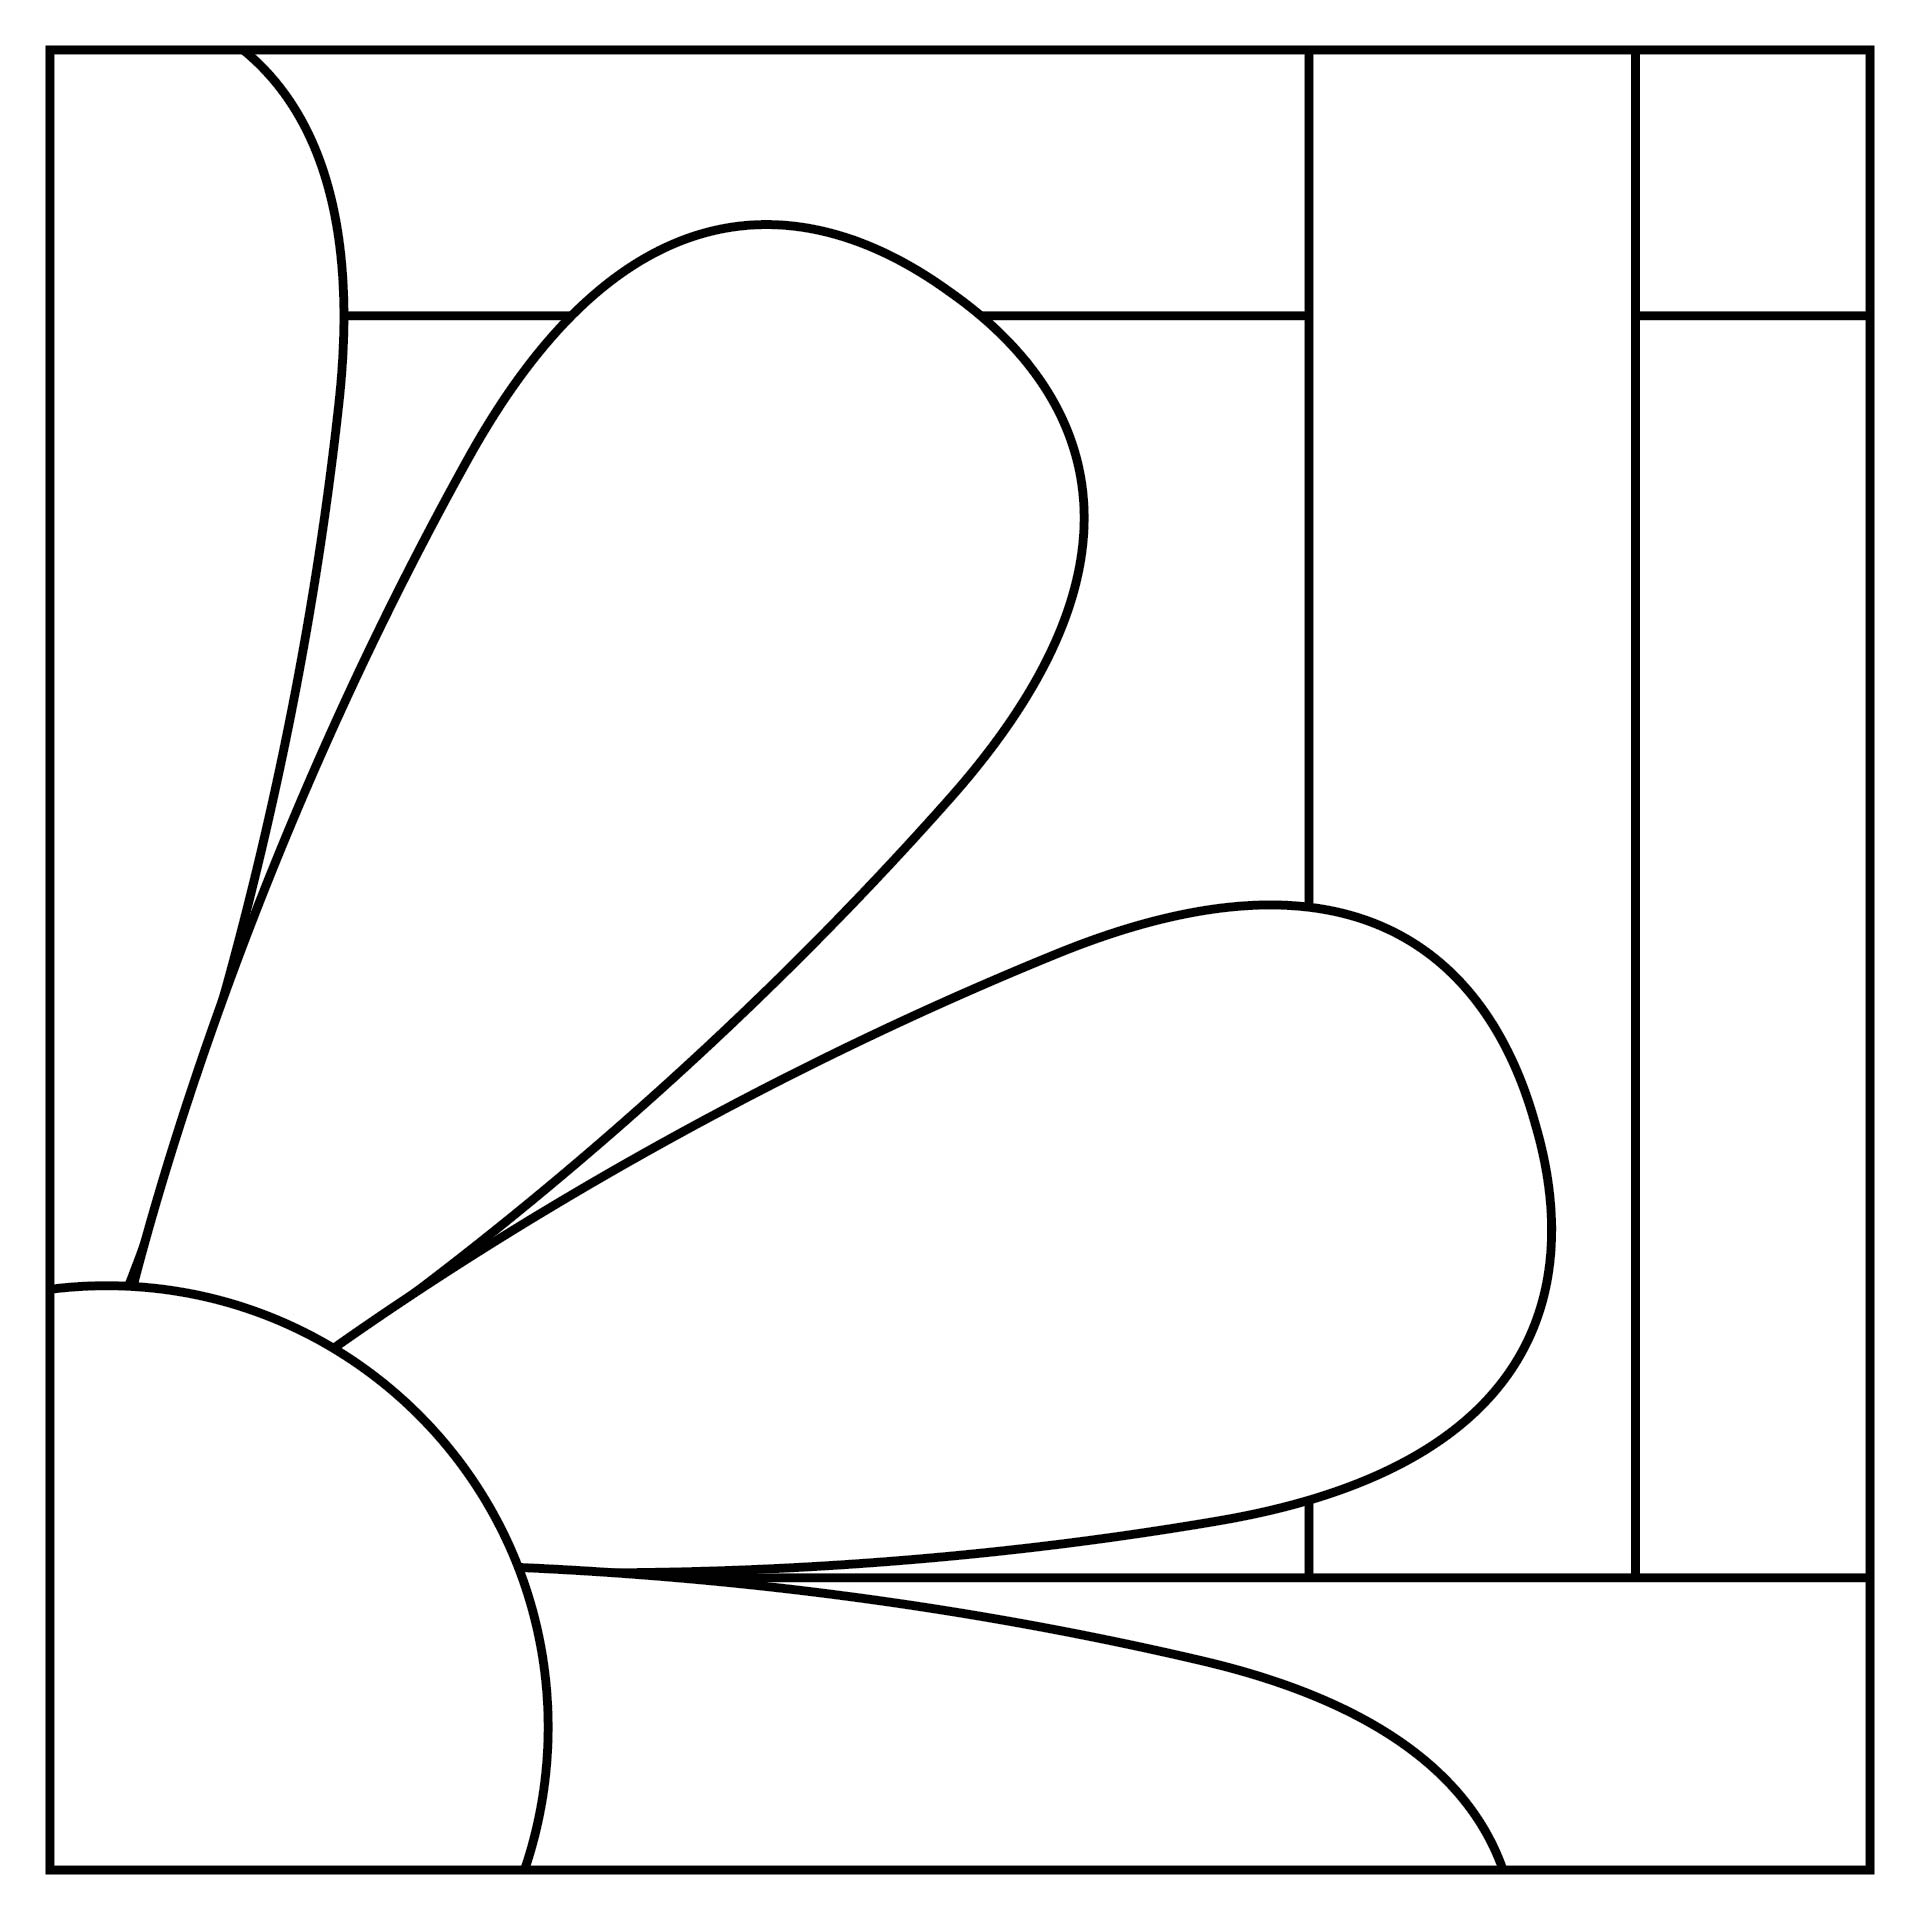 5 Best Images Of Beginner Stained Glass Patterns Printable Simple 